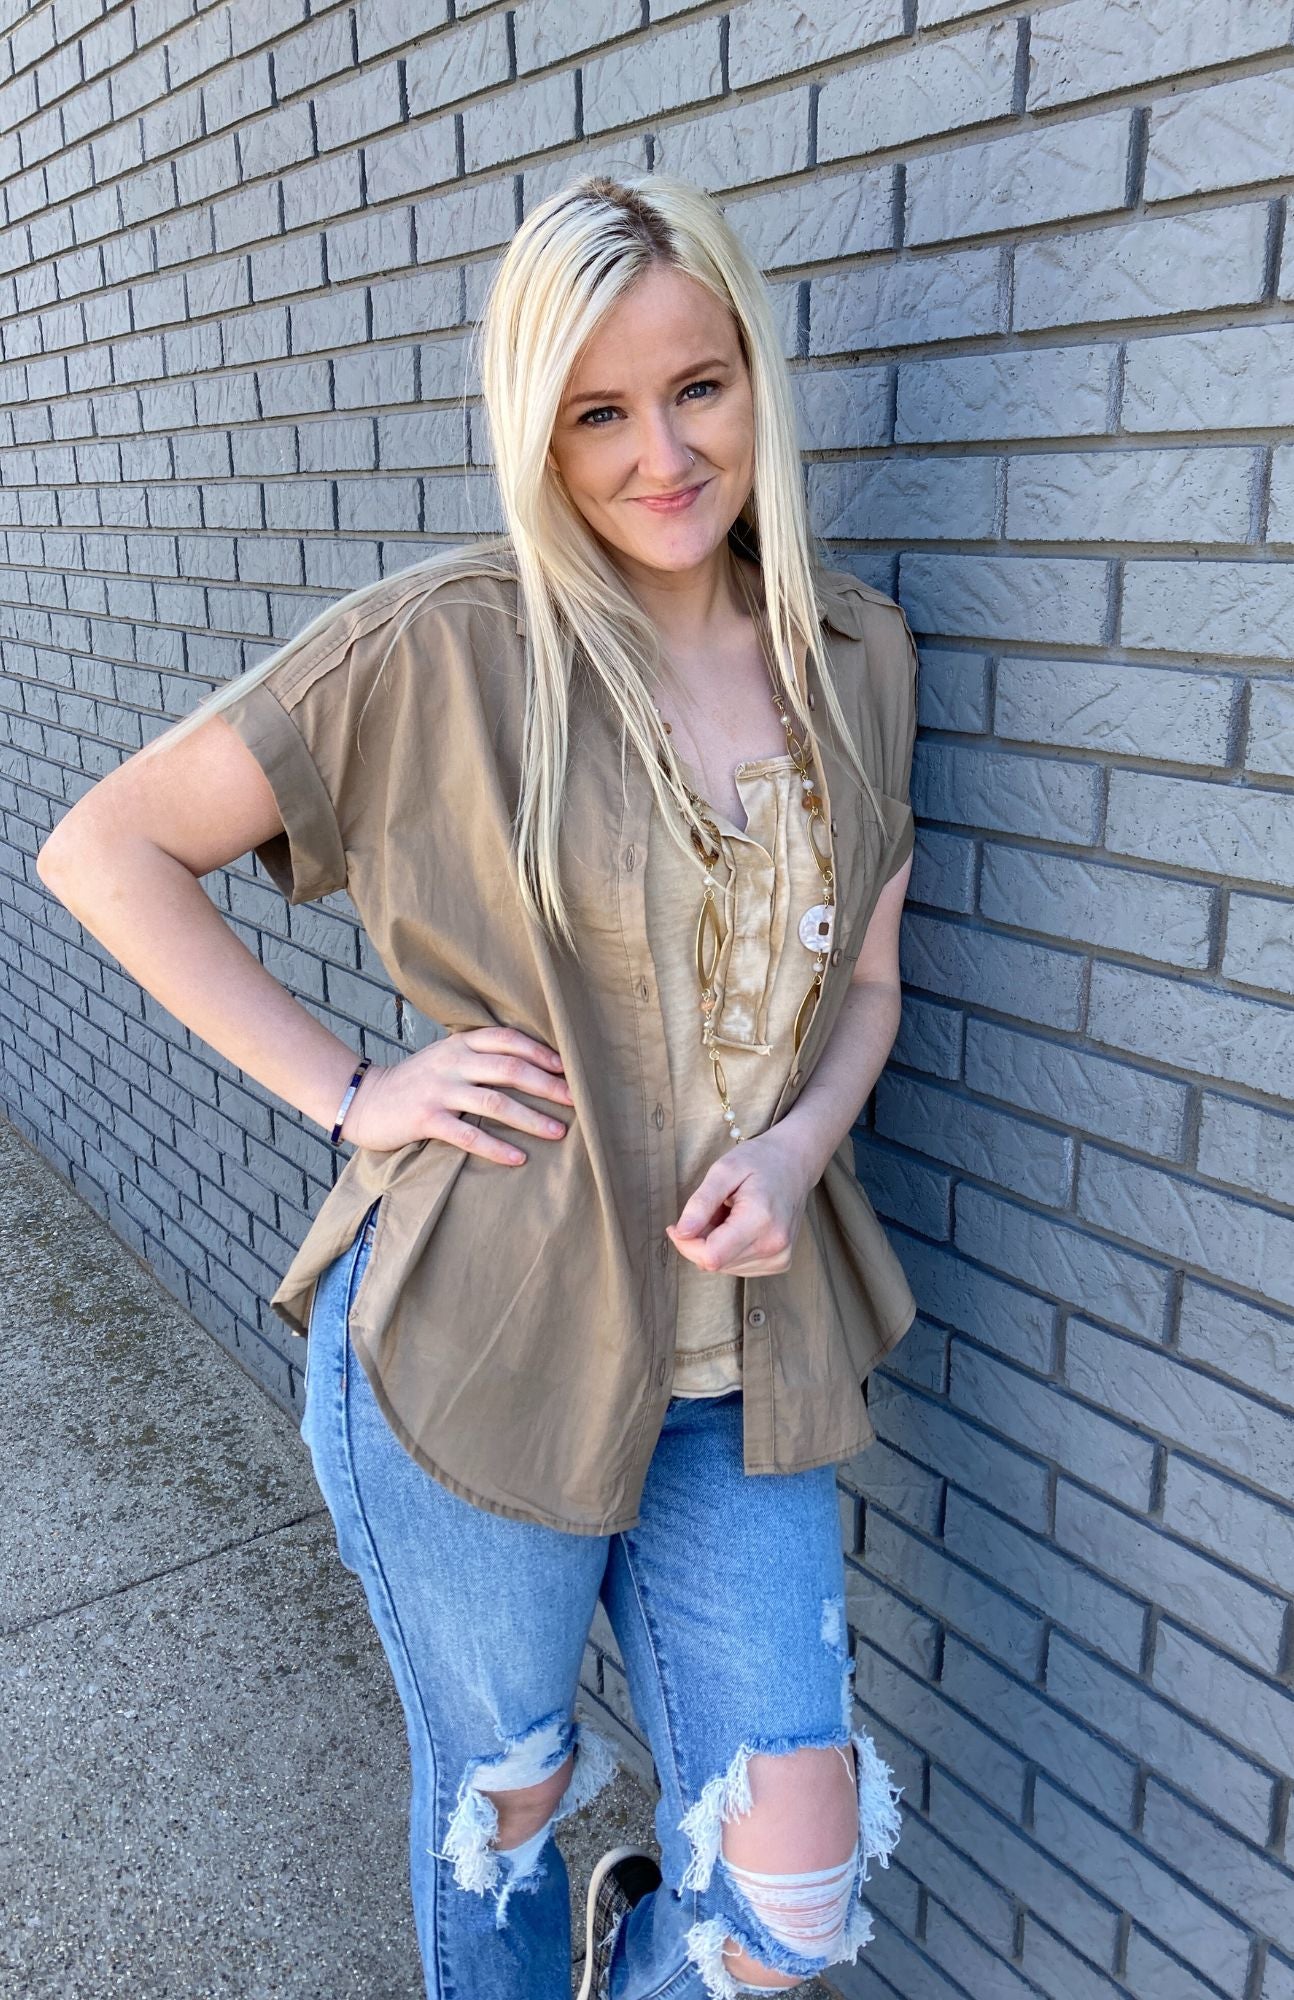 Fashion photo of a young girl with blonde hair. She is wearing a mustard colored tank top with aa brown short sleeve unbuttoned shirt (like a shacket). She is also wearing a pair of light wash distressed jeans.